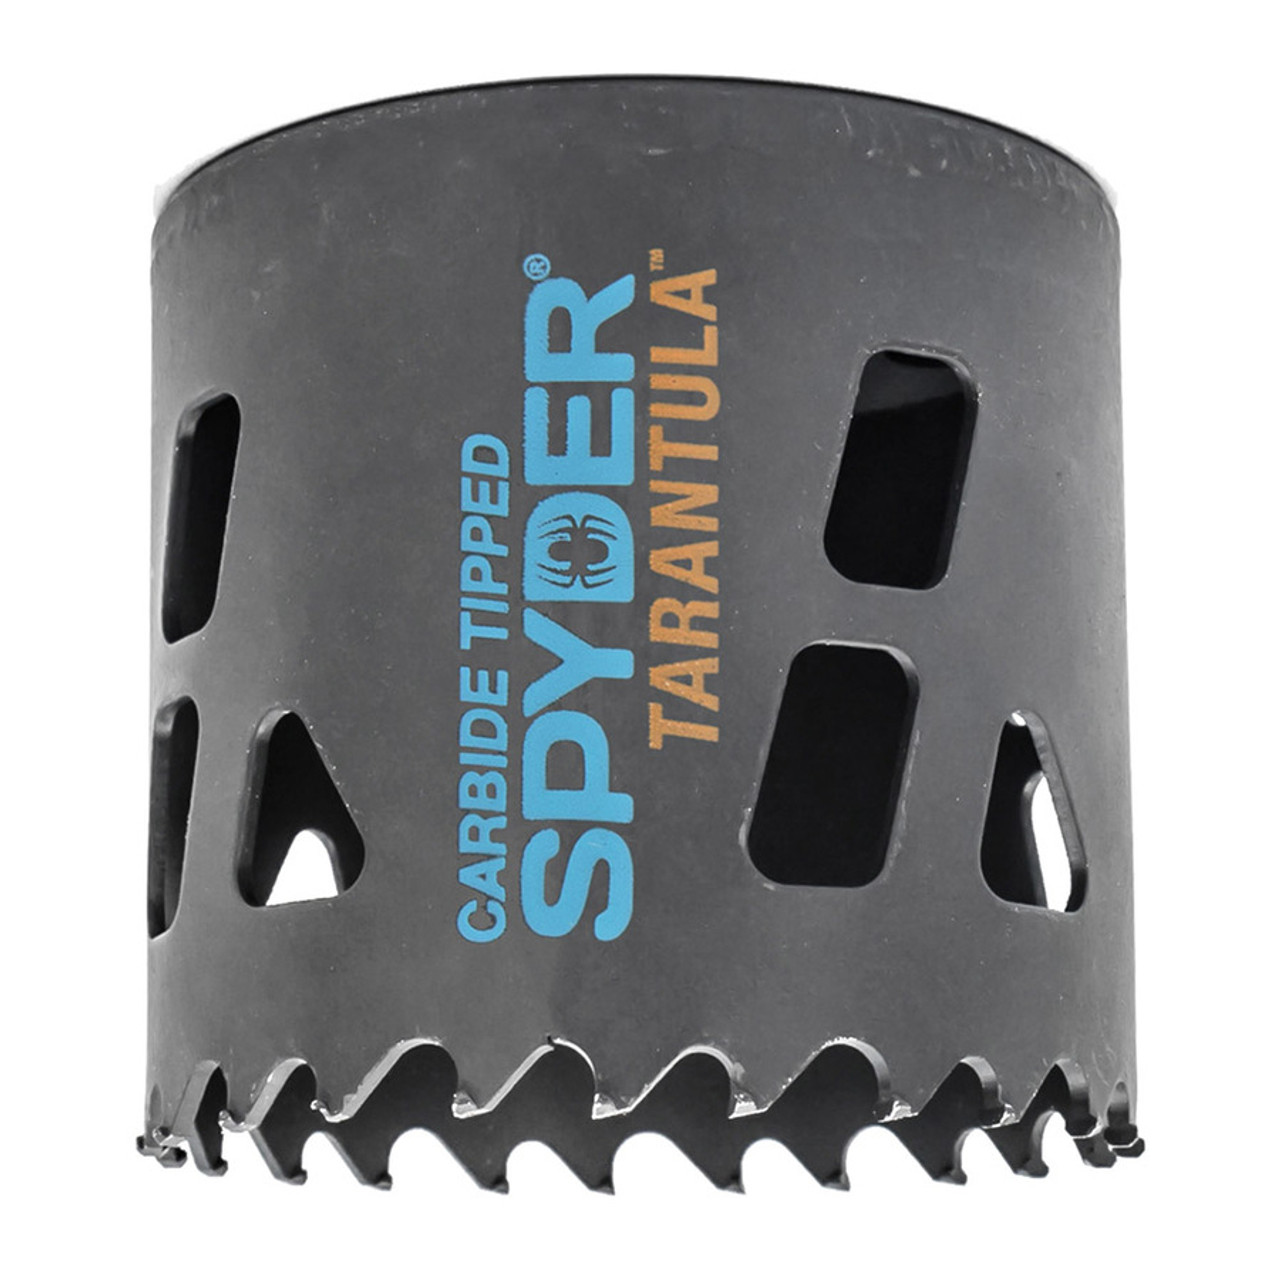 (600912) Spyder Tarantula 2 3/4" Inch 70mm Hole Saw Tungsten Carbide-Tipped Non-Arbored Hex 10 for Steel, Wood, Plastics + More